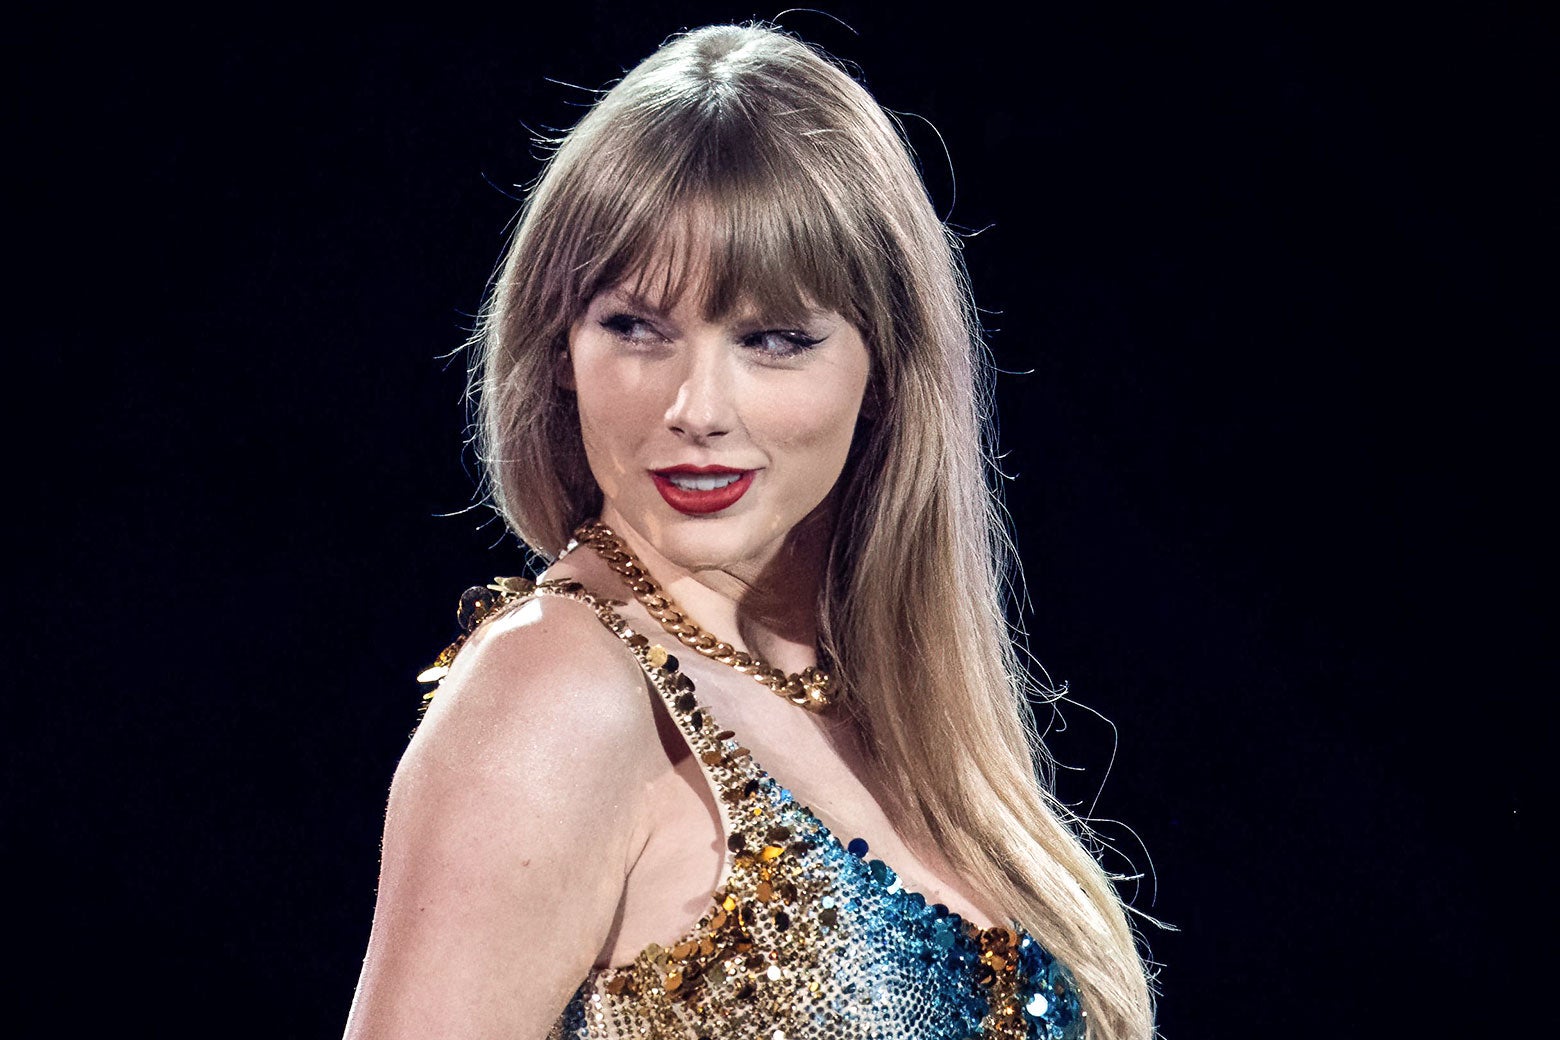 Taylor Swift: More Than Just Breakup Songs